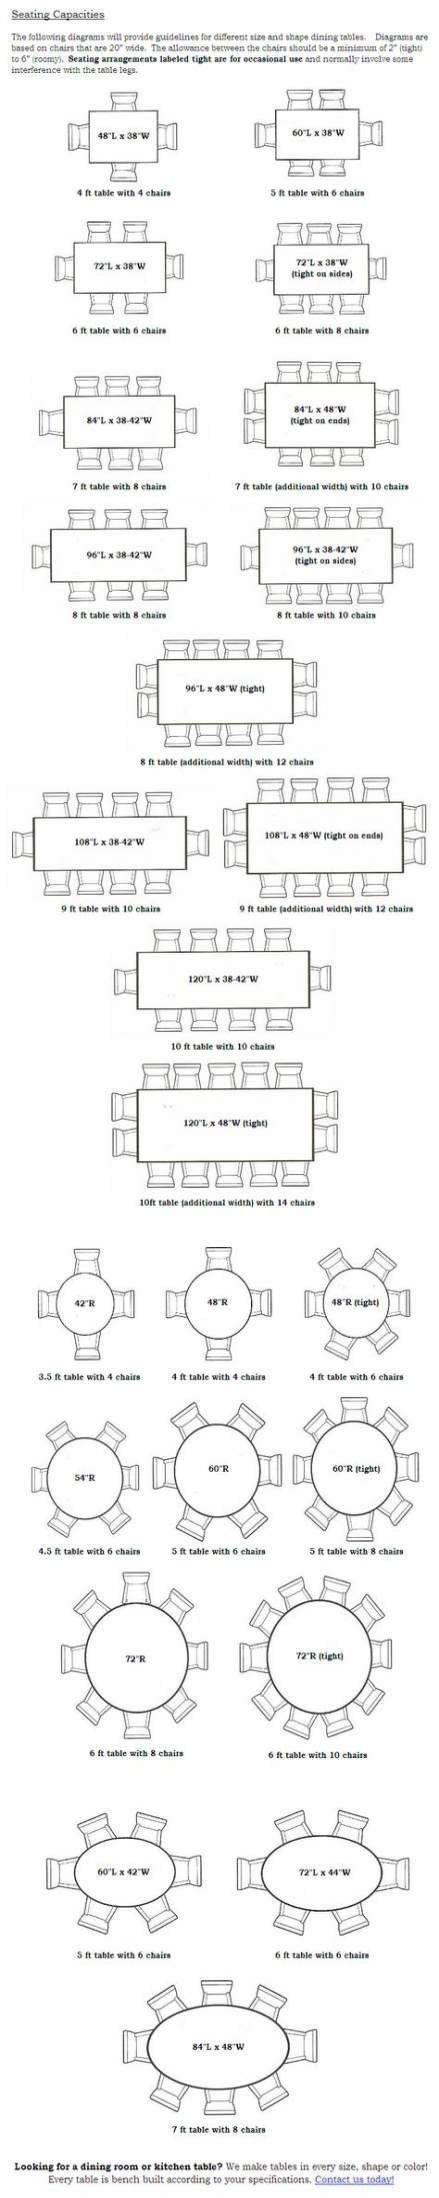 table seating plan diy dining rooms  ideas event seating layout trendy seating wedding